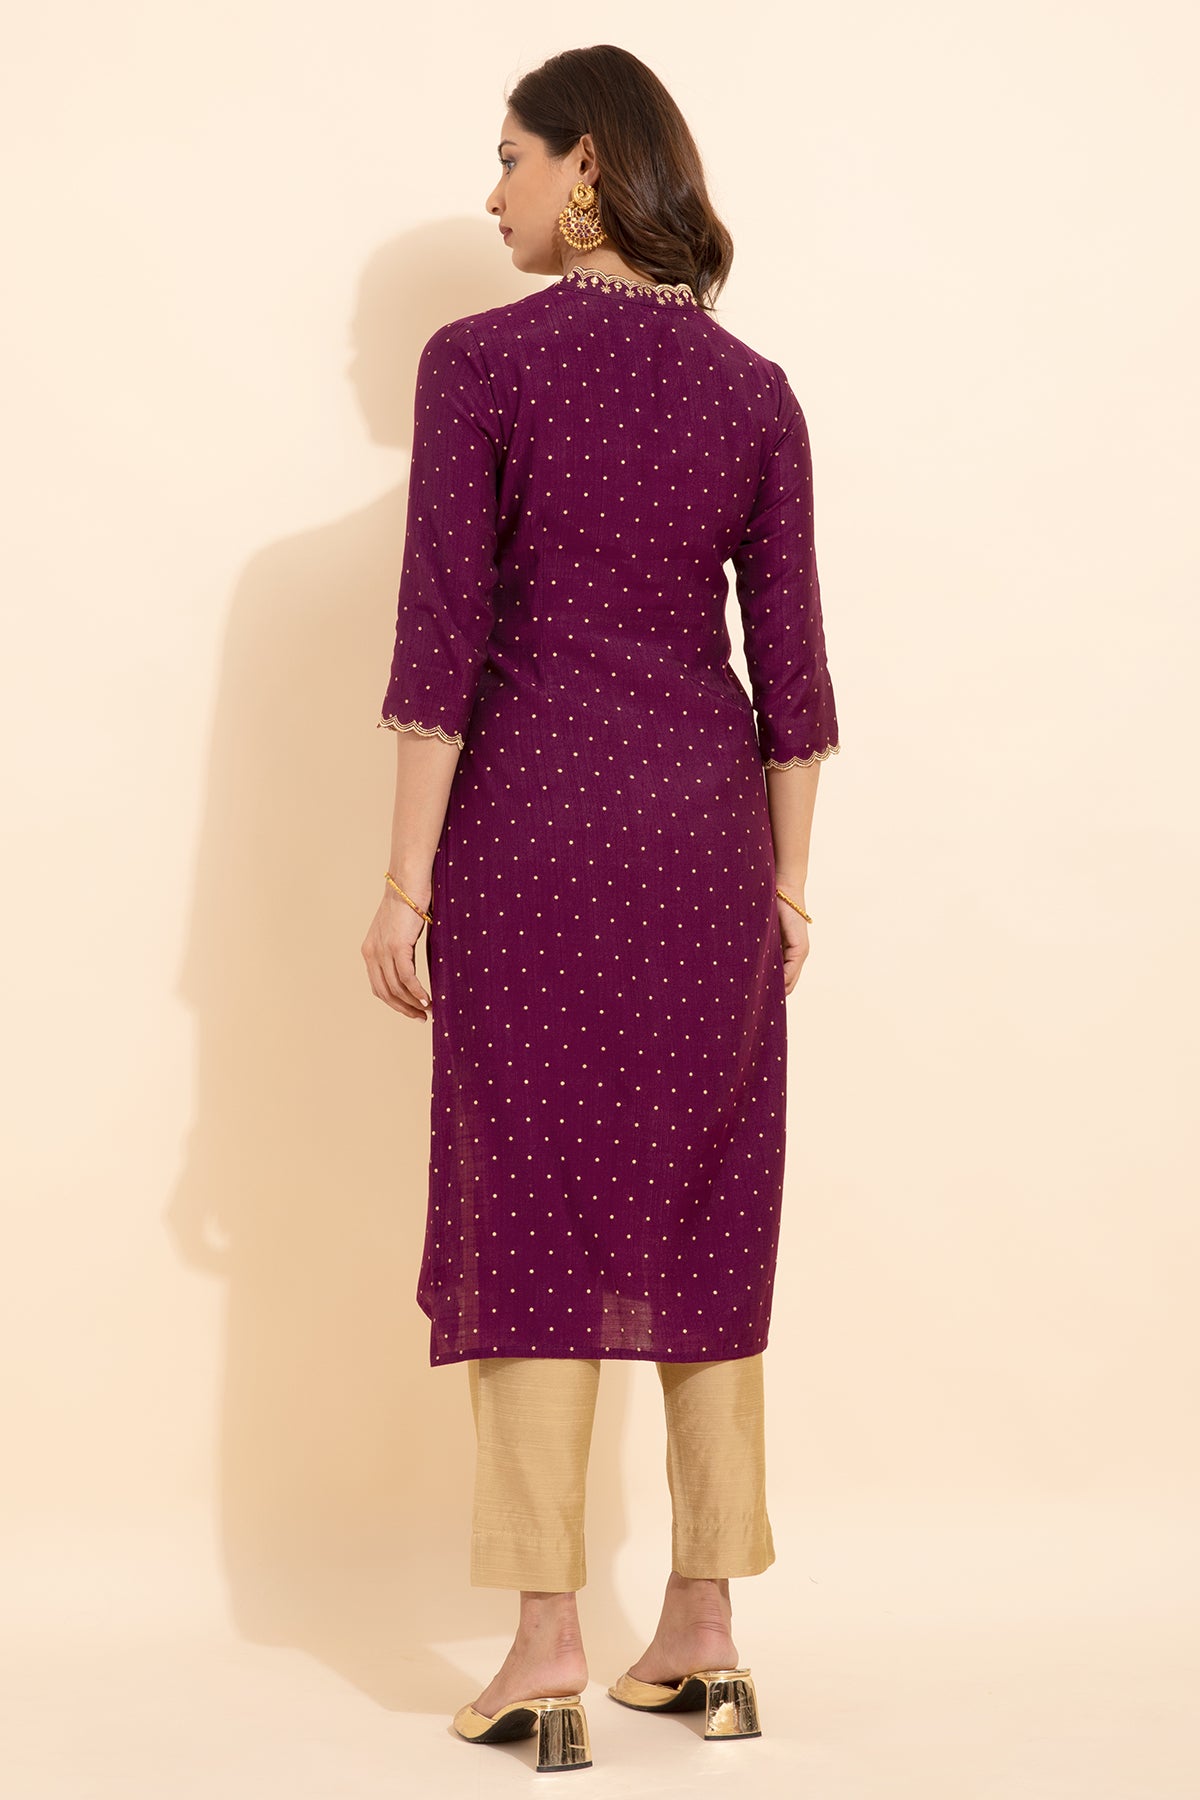 Floral Embroidered Neckline With Allover Polka Dots Printed Kurta Purple